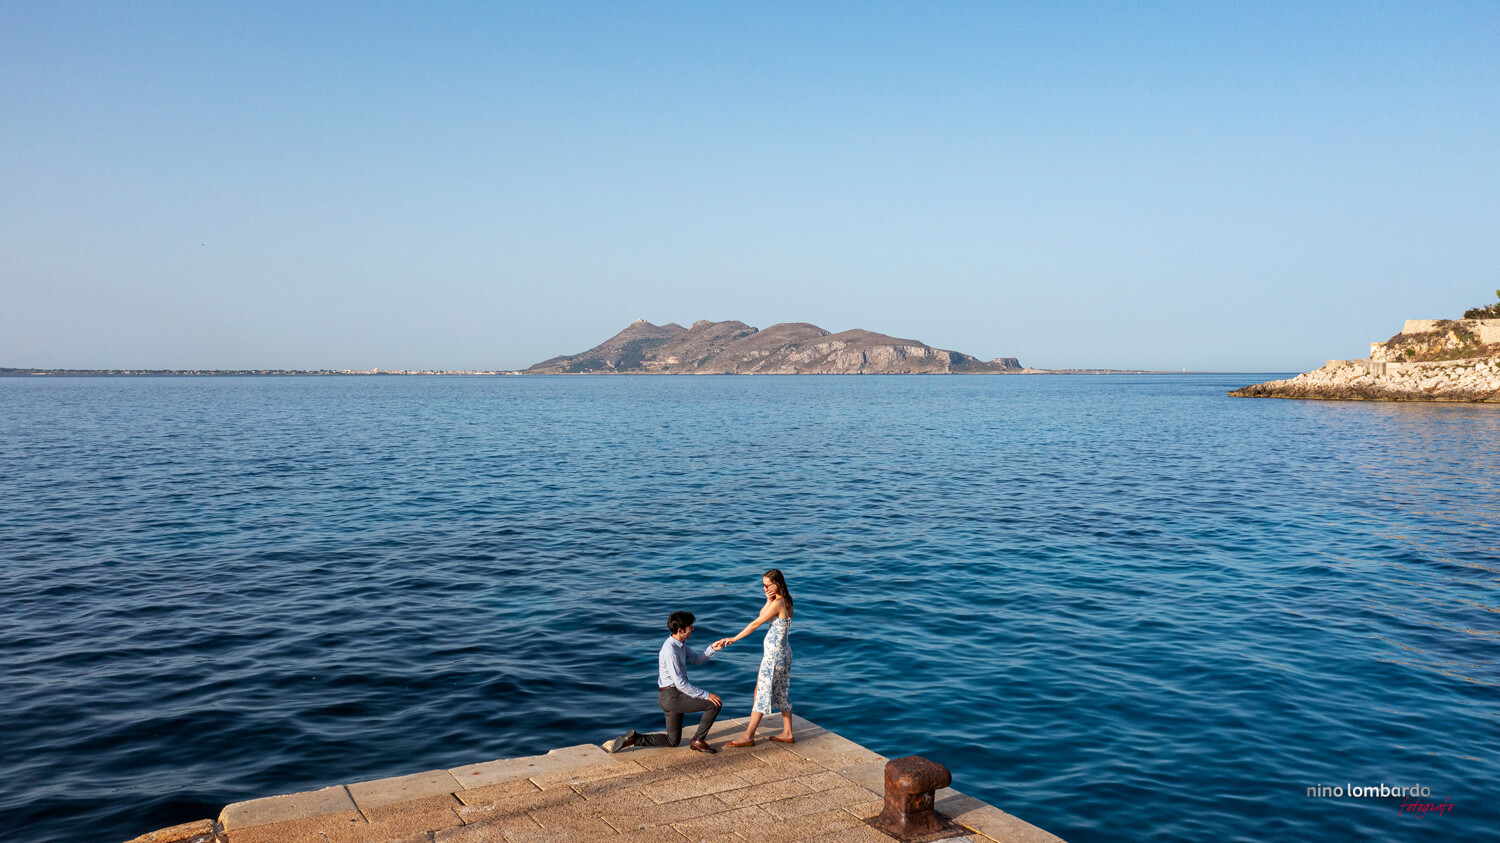 Levanzo marriage proposal and shooting Western Sicily Photographer Nino Lombardo